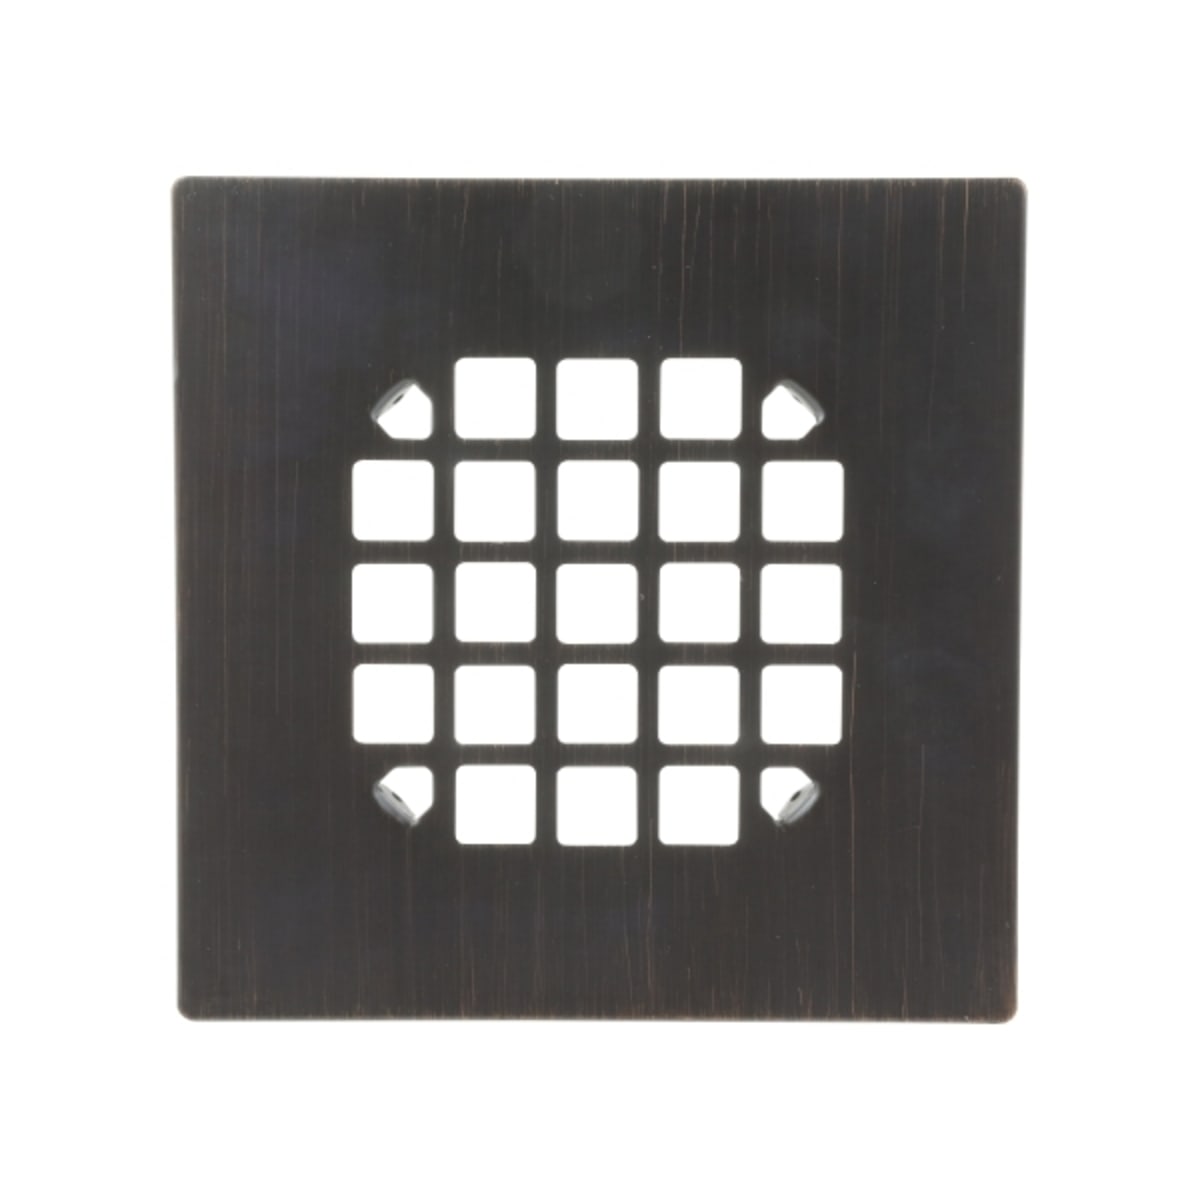 OATEY Designline 4 in. x 4 in. Stainless Steel Square Shower Drain with  Square Pattern Drain Cover in Matte Black